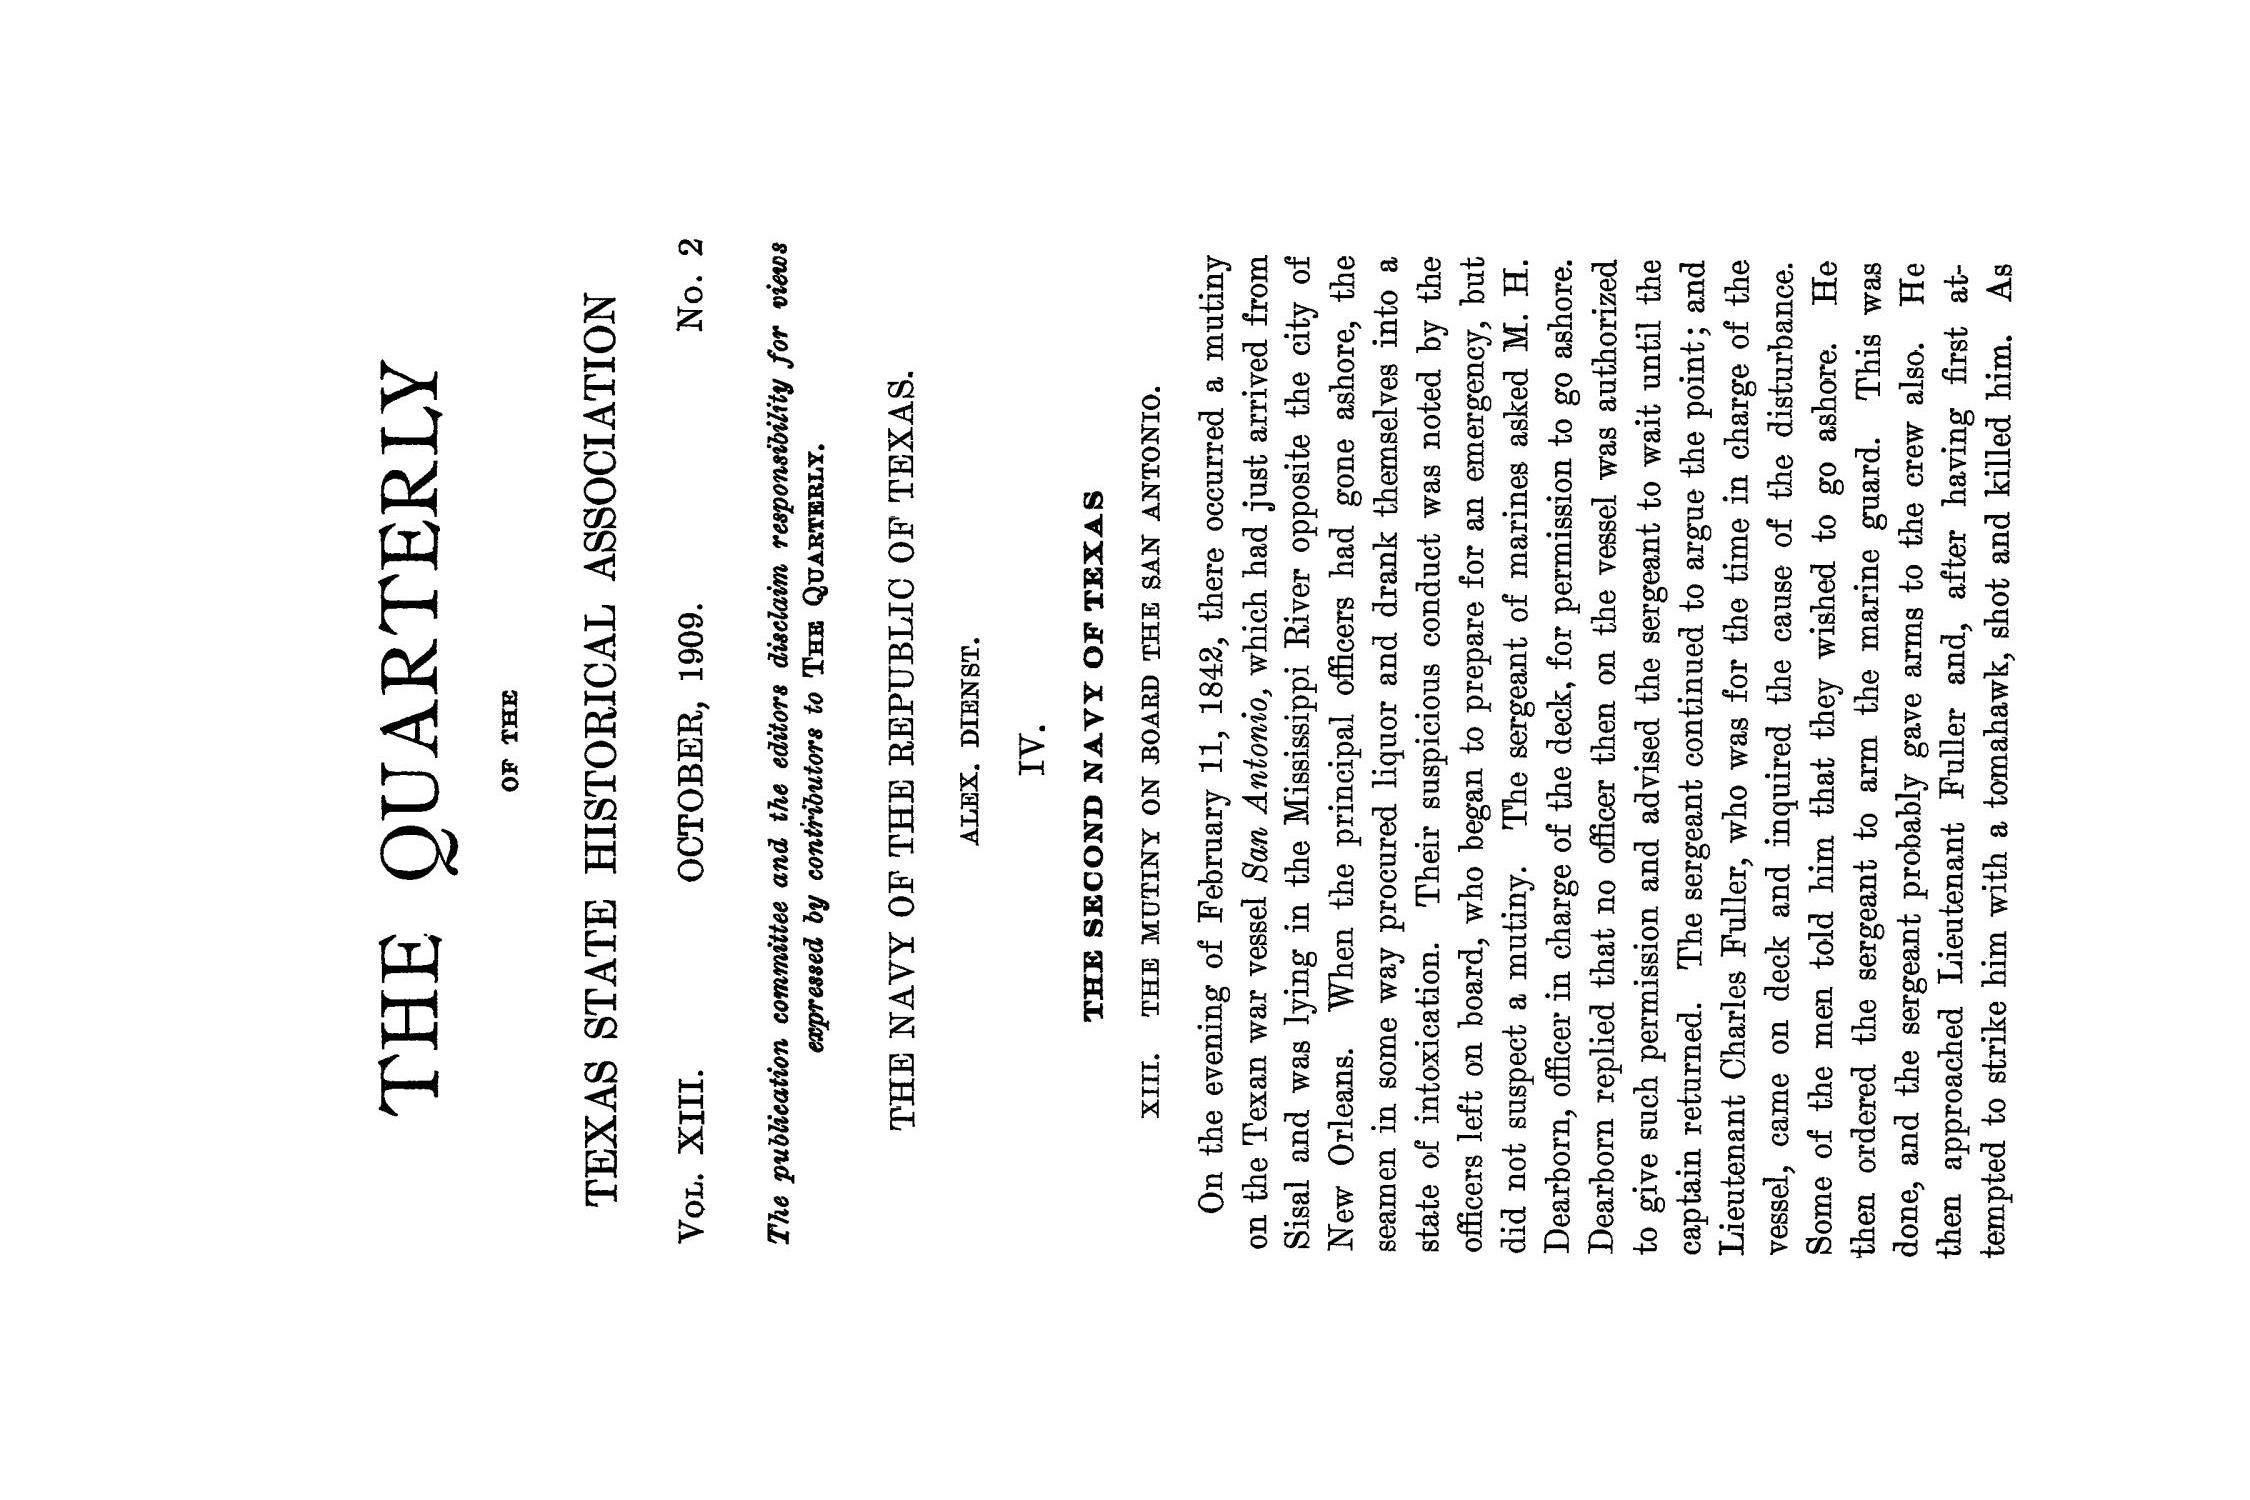 The Quarterly of the Texas State Historical Association, Volume 13, July 1909 - April, 1910
                                                
                                                    85
                                                